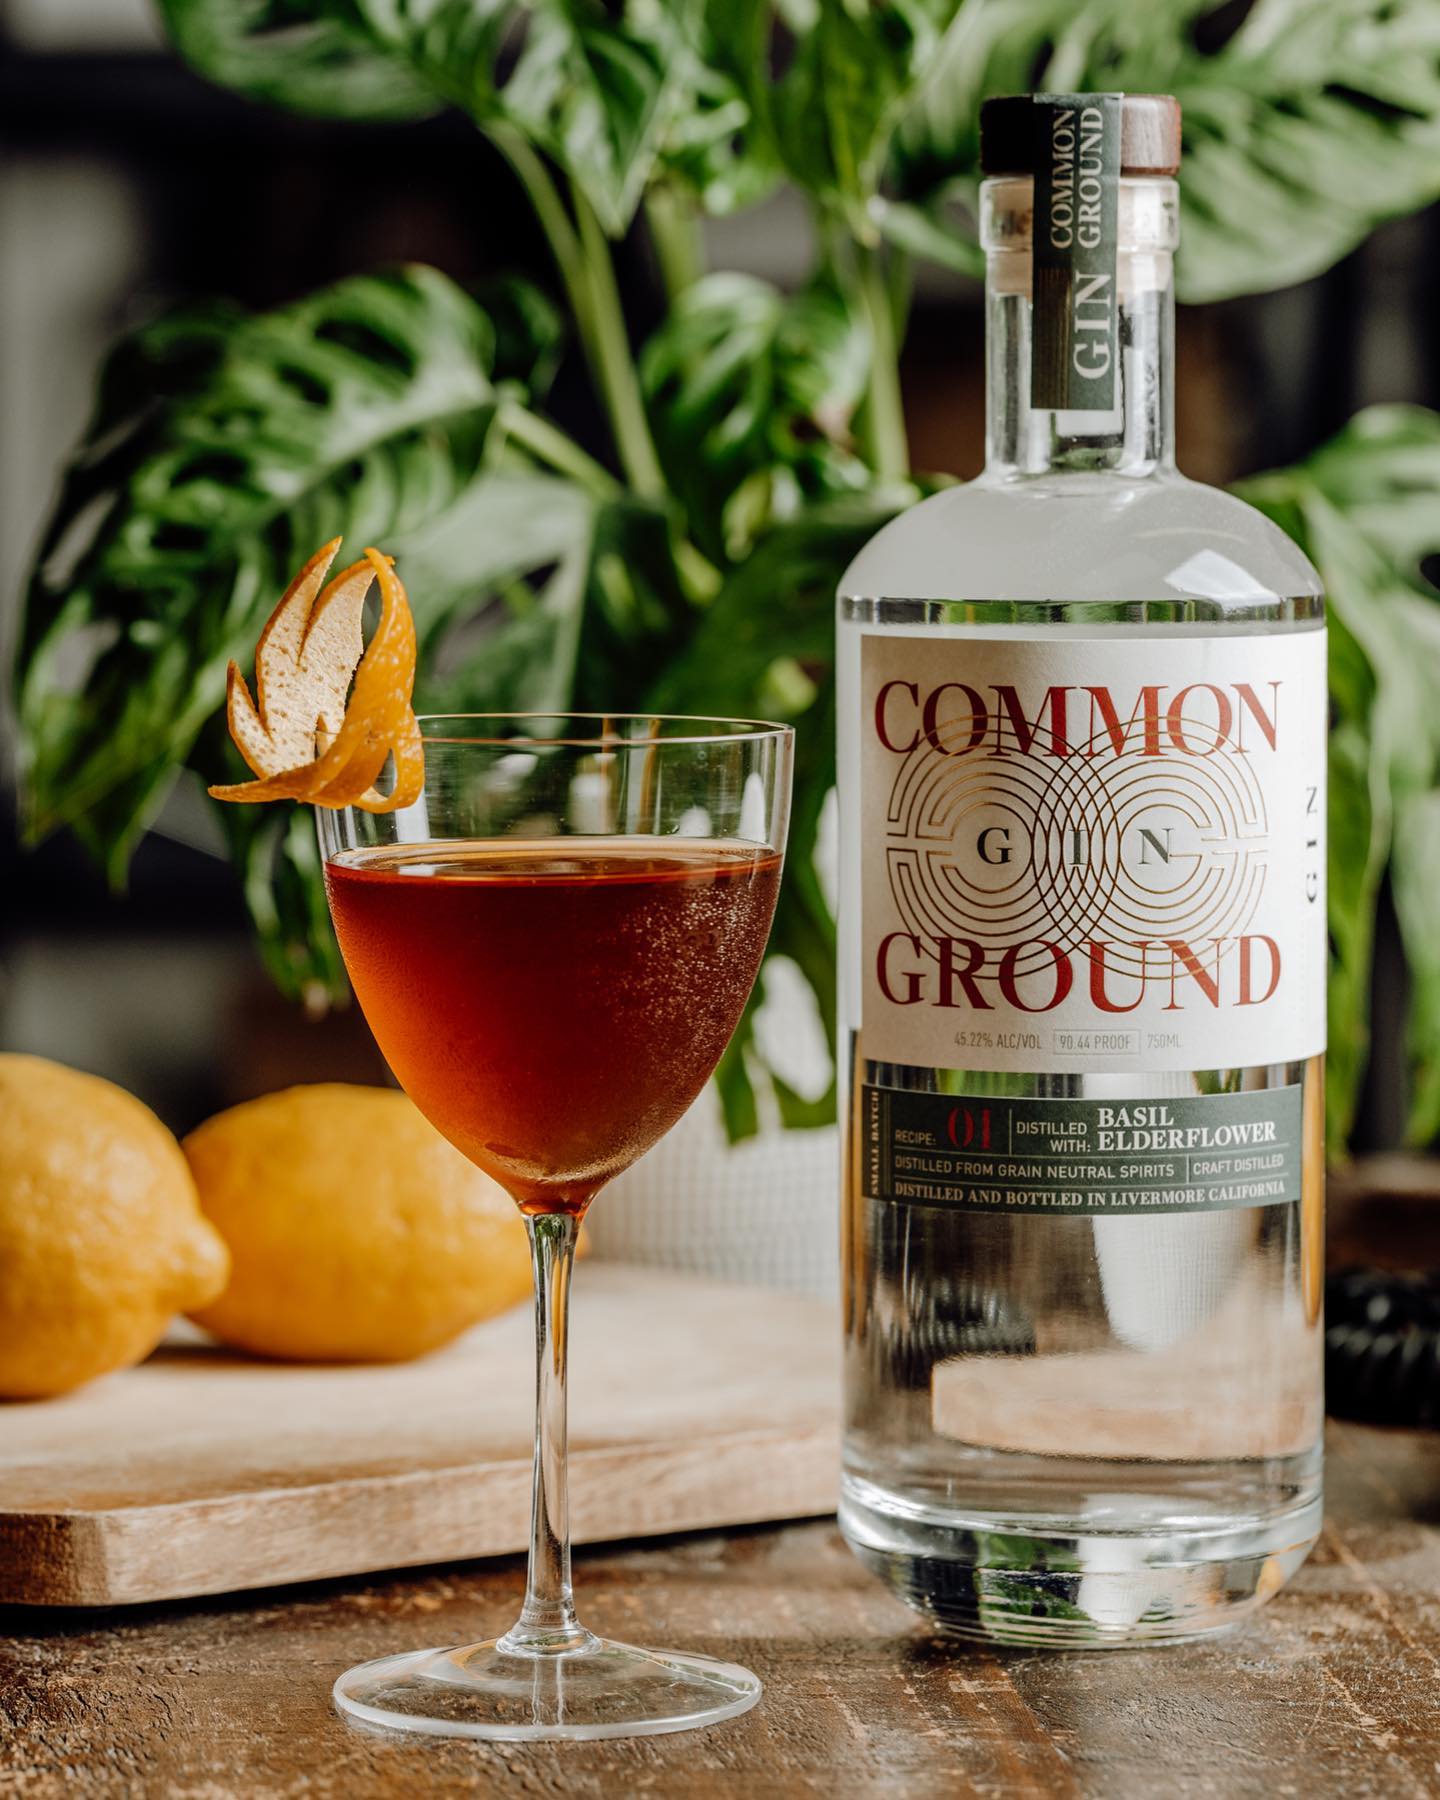 Common Ground Gin: Spirit Review | Intoxicology.com